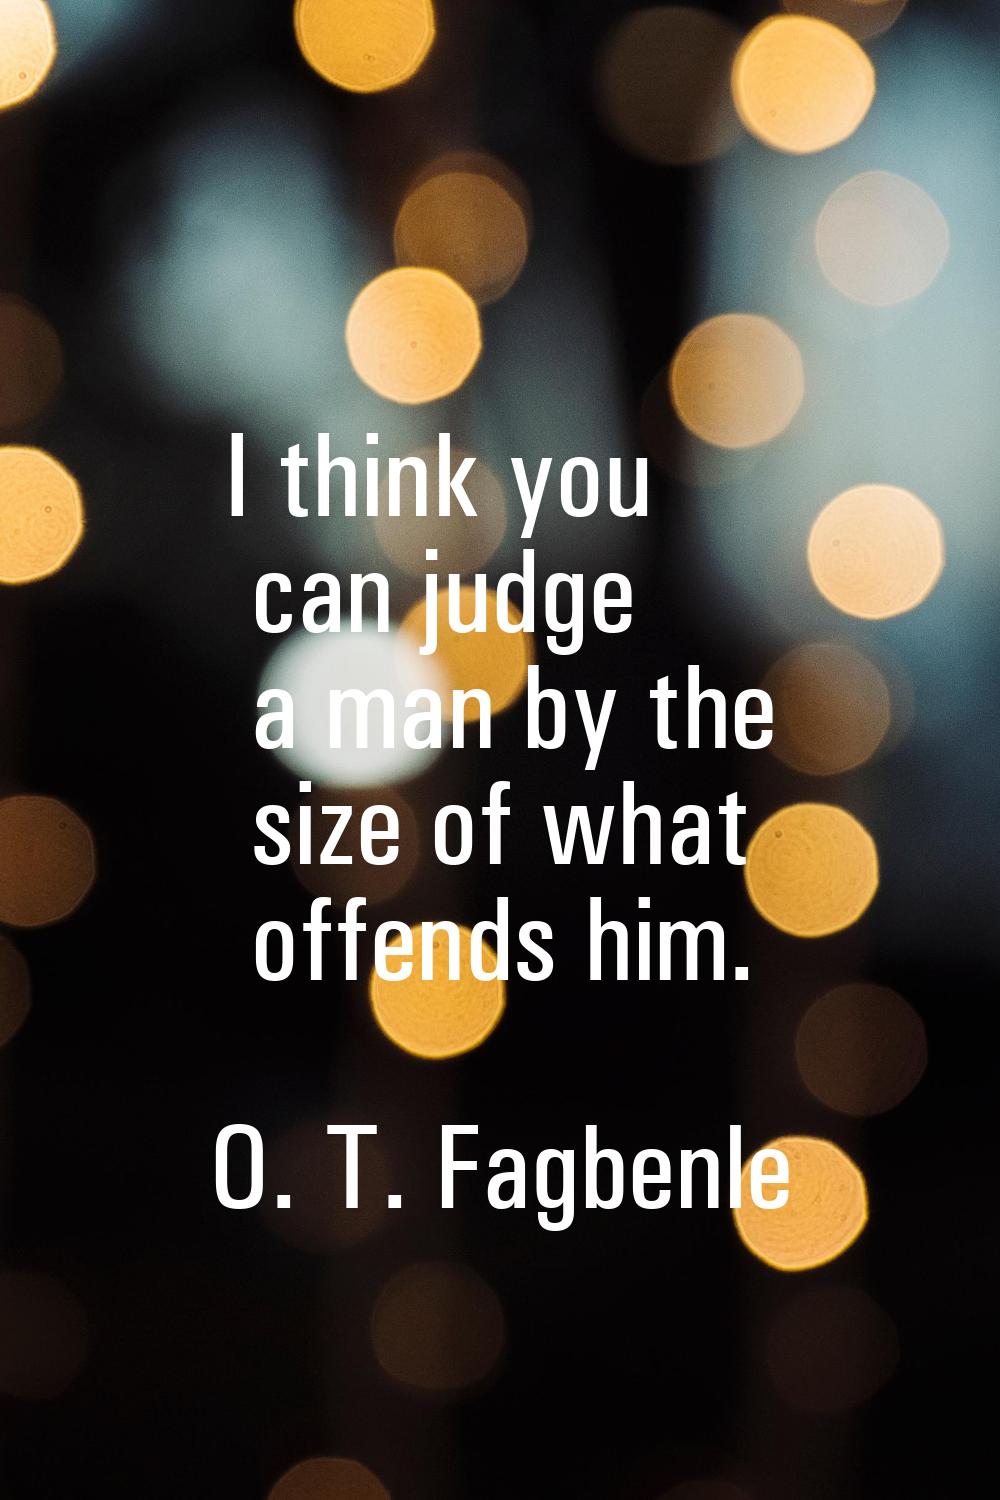 I think you can judge a man by the size of what offends him.